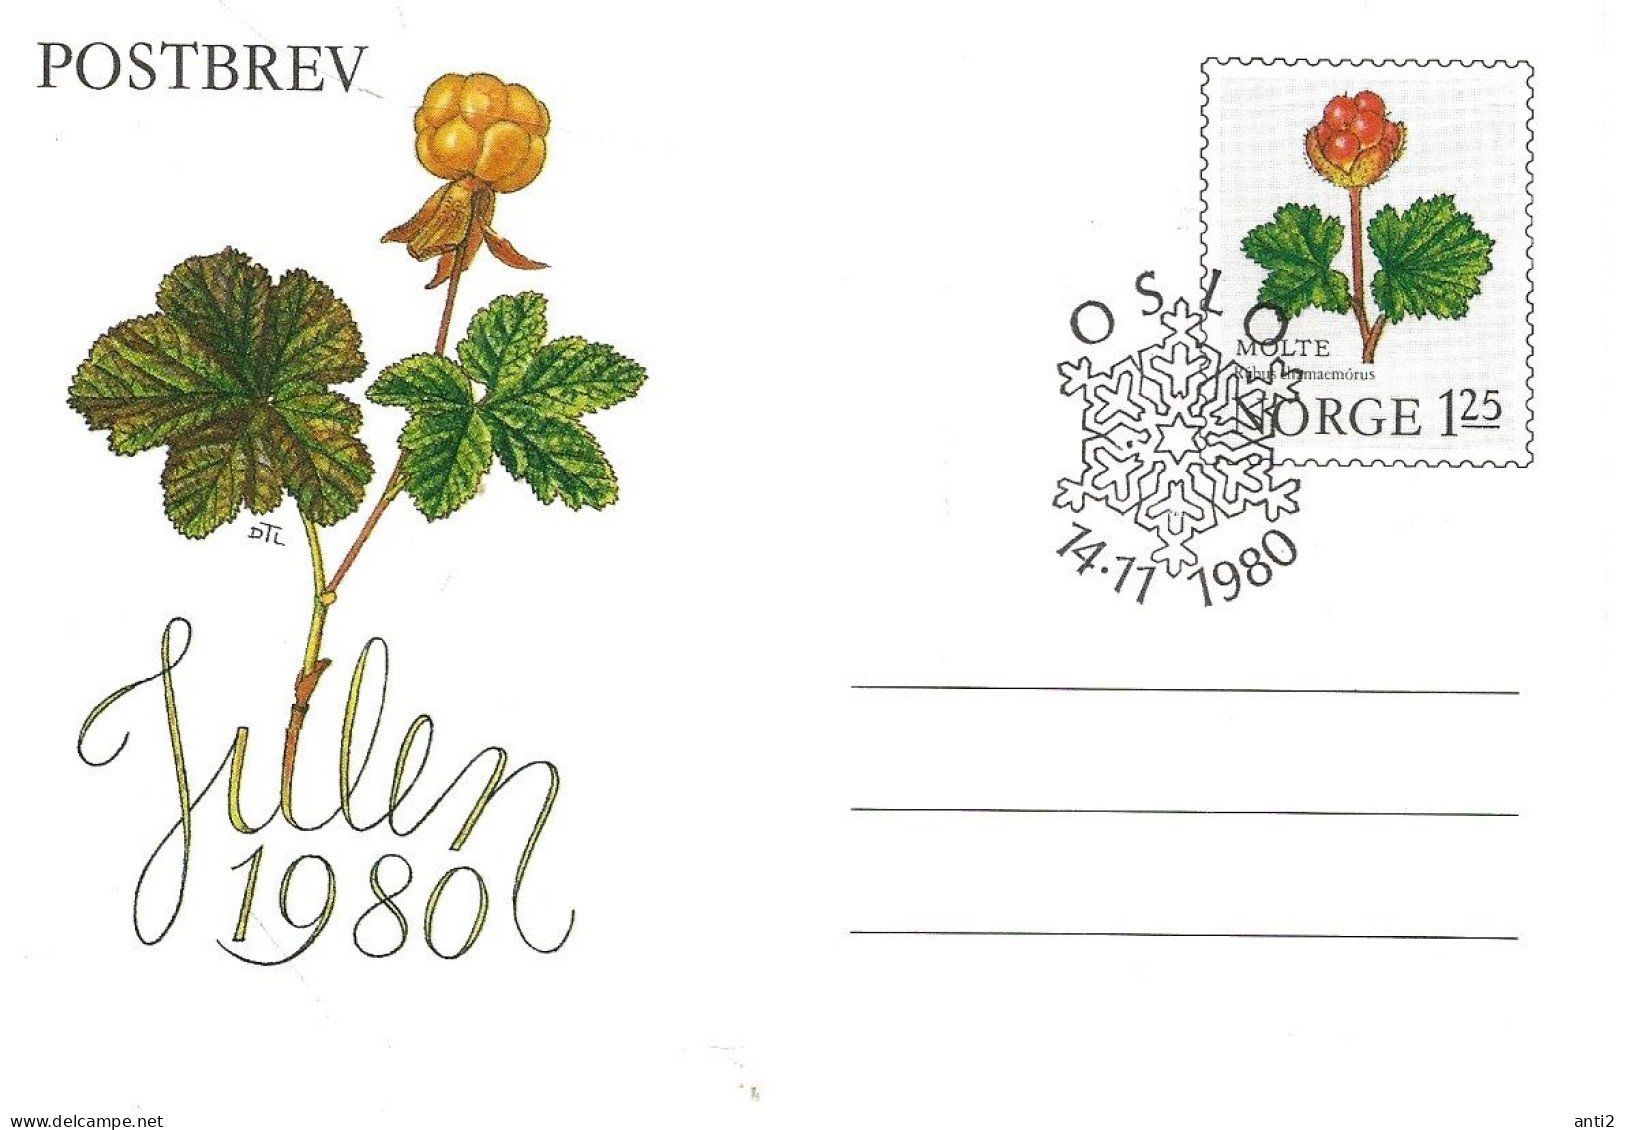 Norge Norway 1980 Stationary - Postbrev, Letter With Imprinted Stamp Special For Christmas 1980 With Ripe Berries   FDC - Briefe U. Dokumente